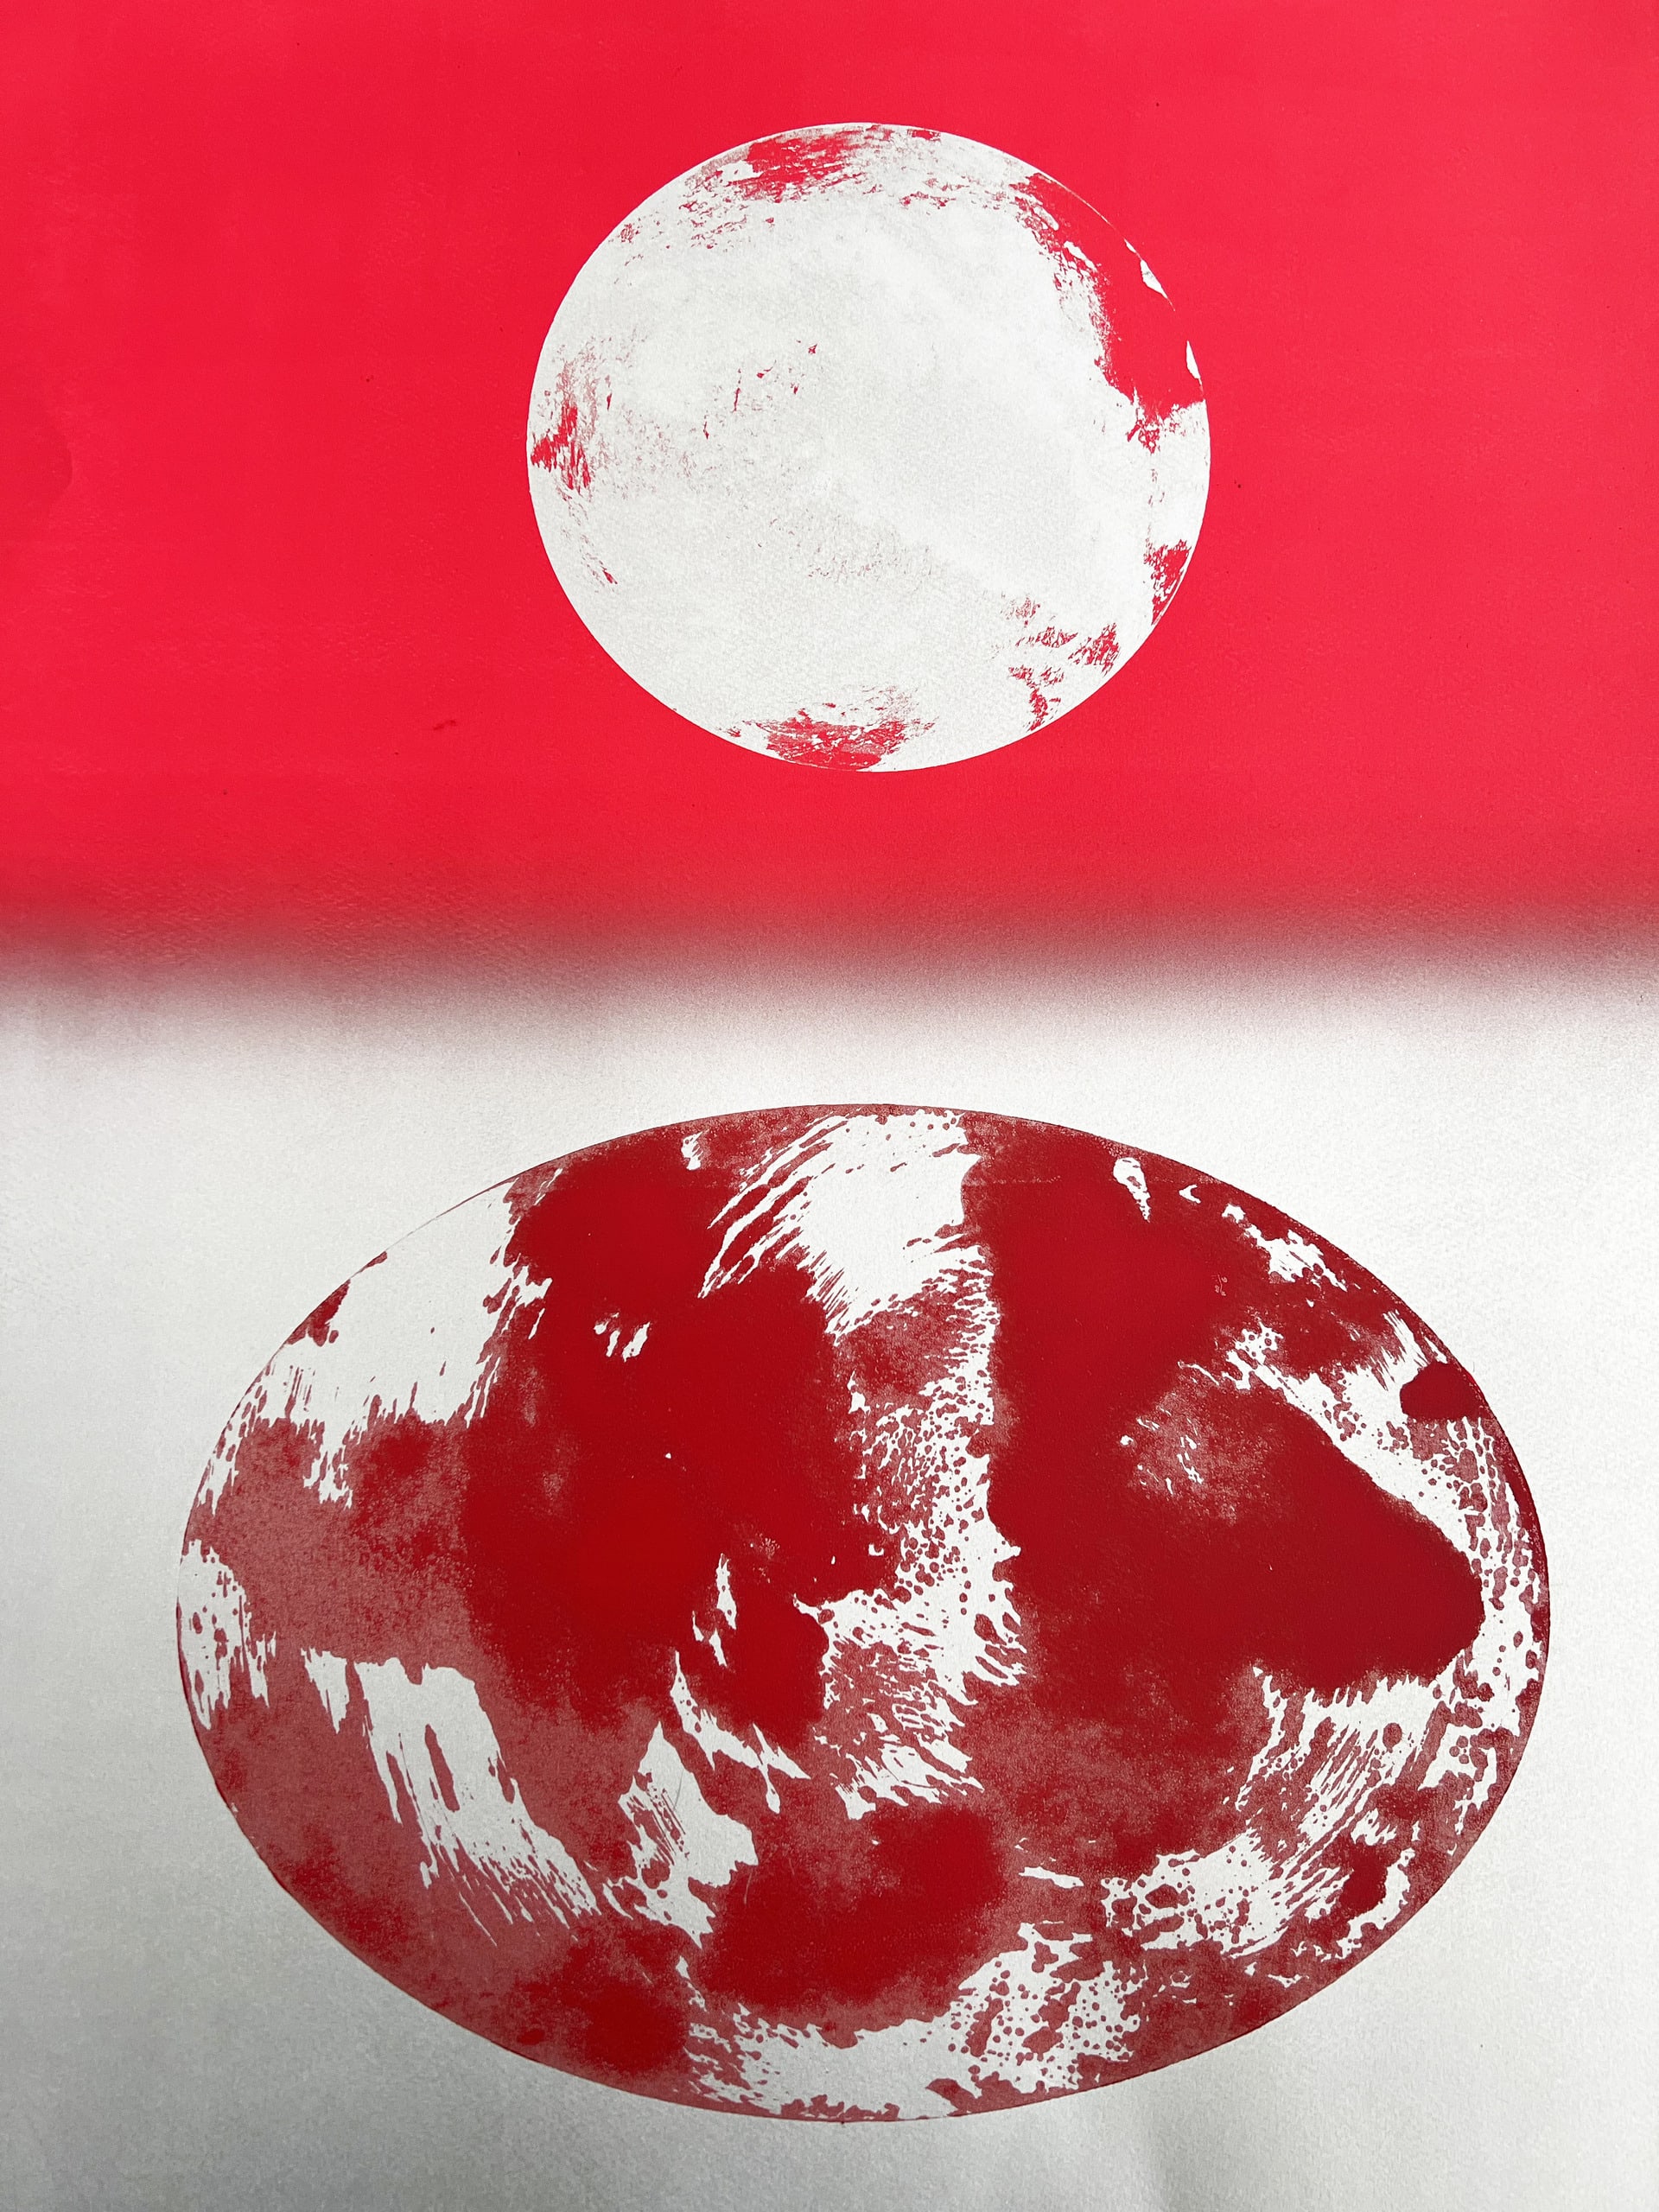 Monoprint using circular shapes of red and silver.